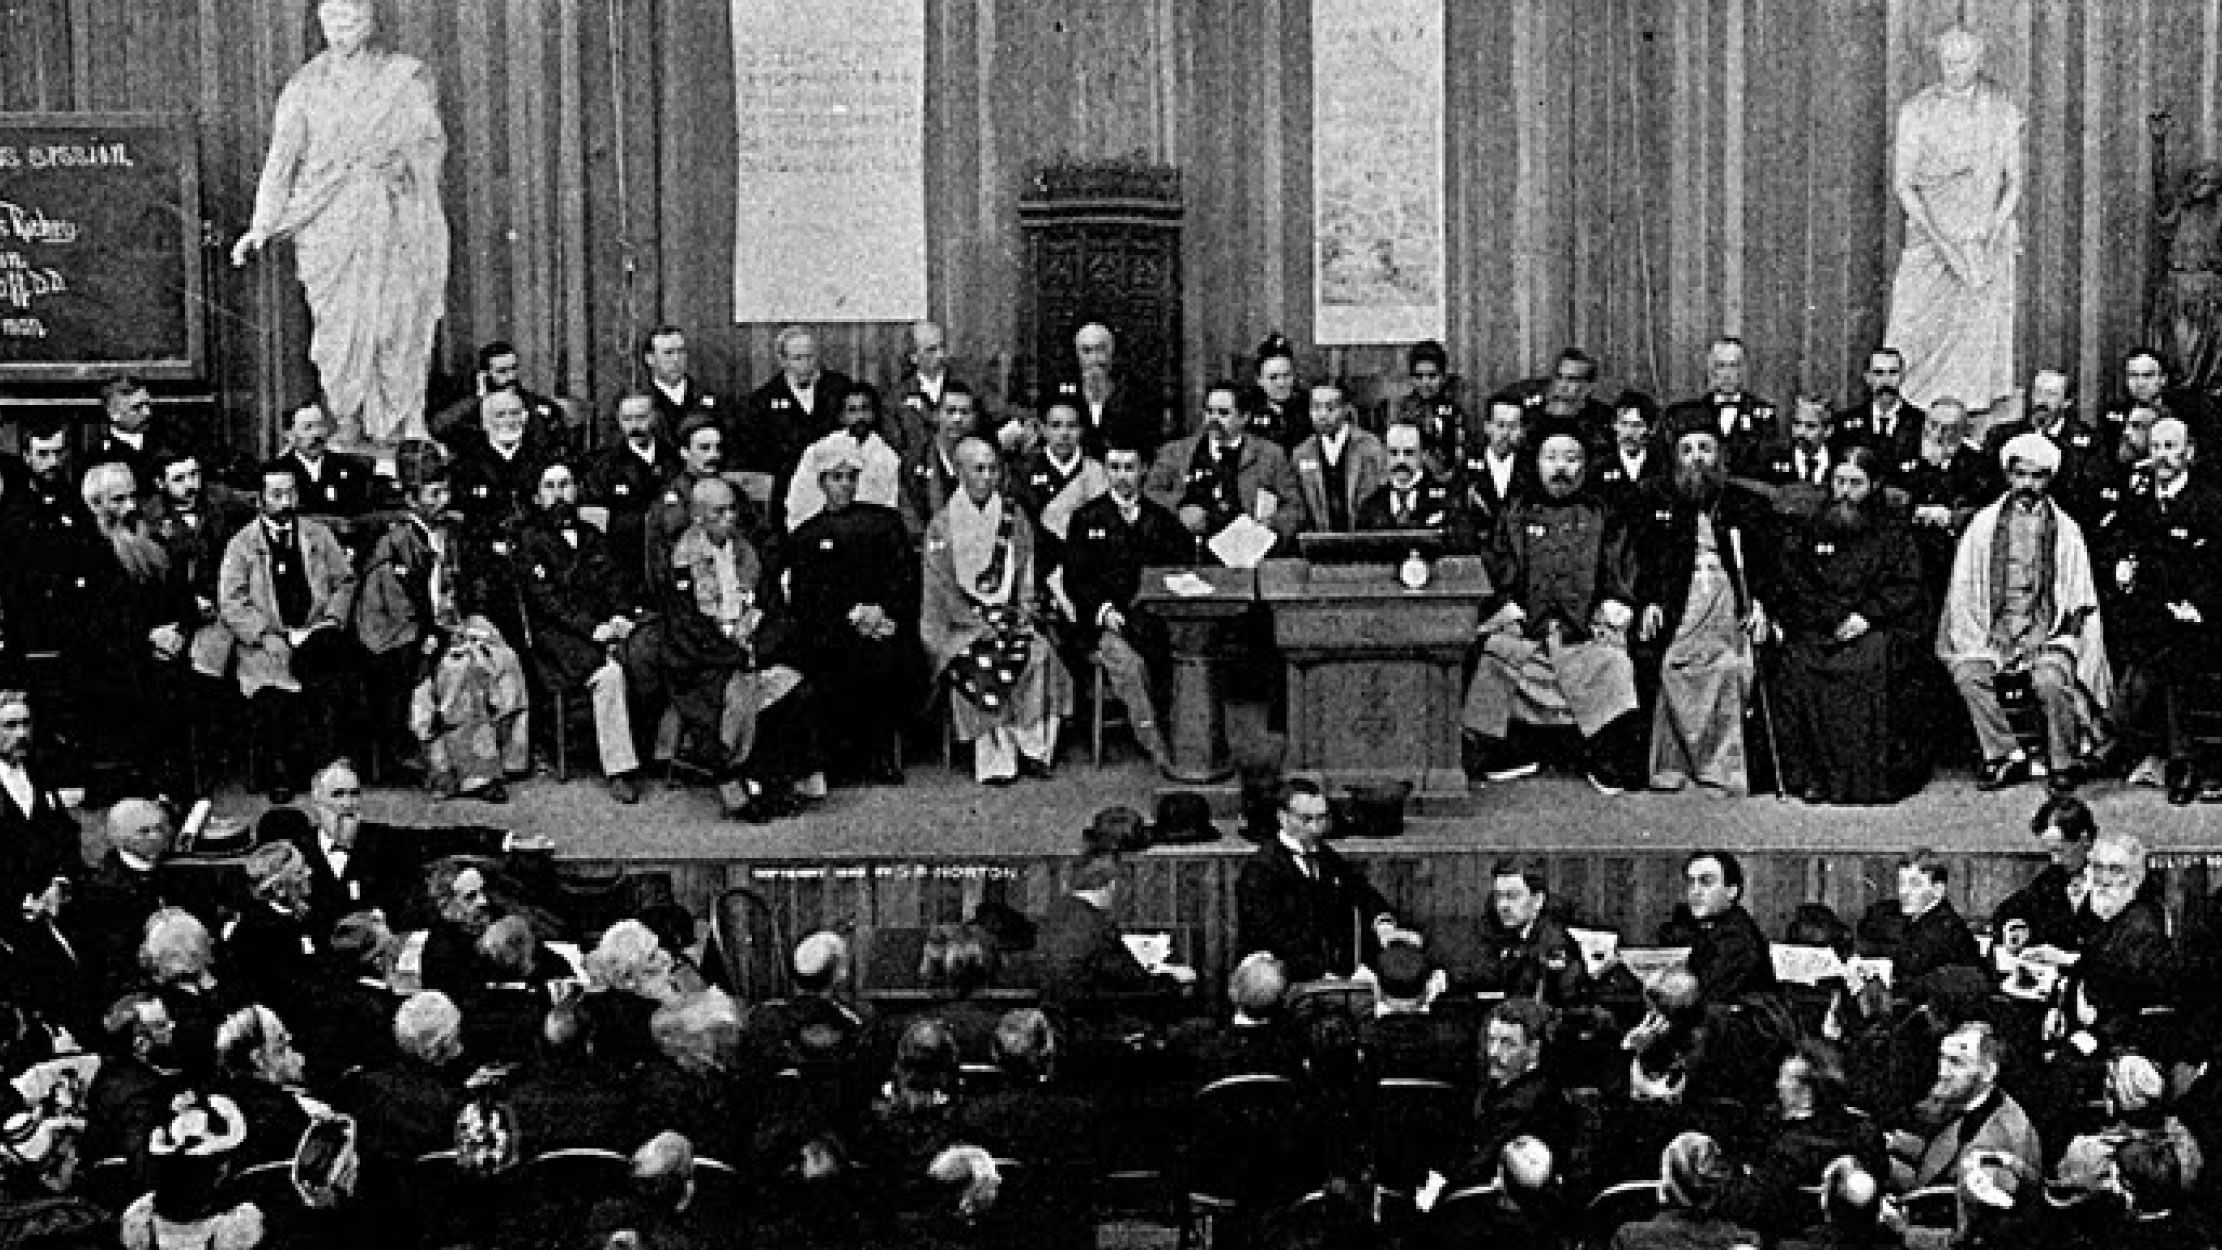 photo: 1893 World’s Parliament of Religions - The Birthplace of the Interfaith Movement